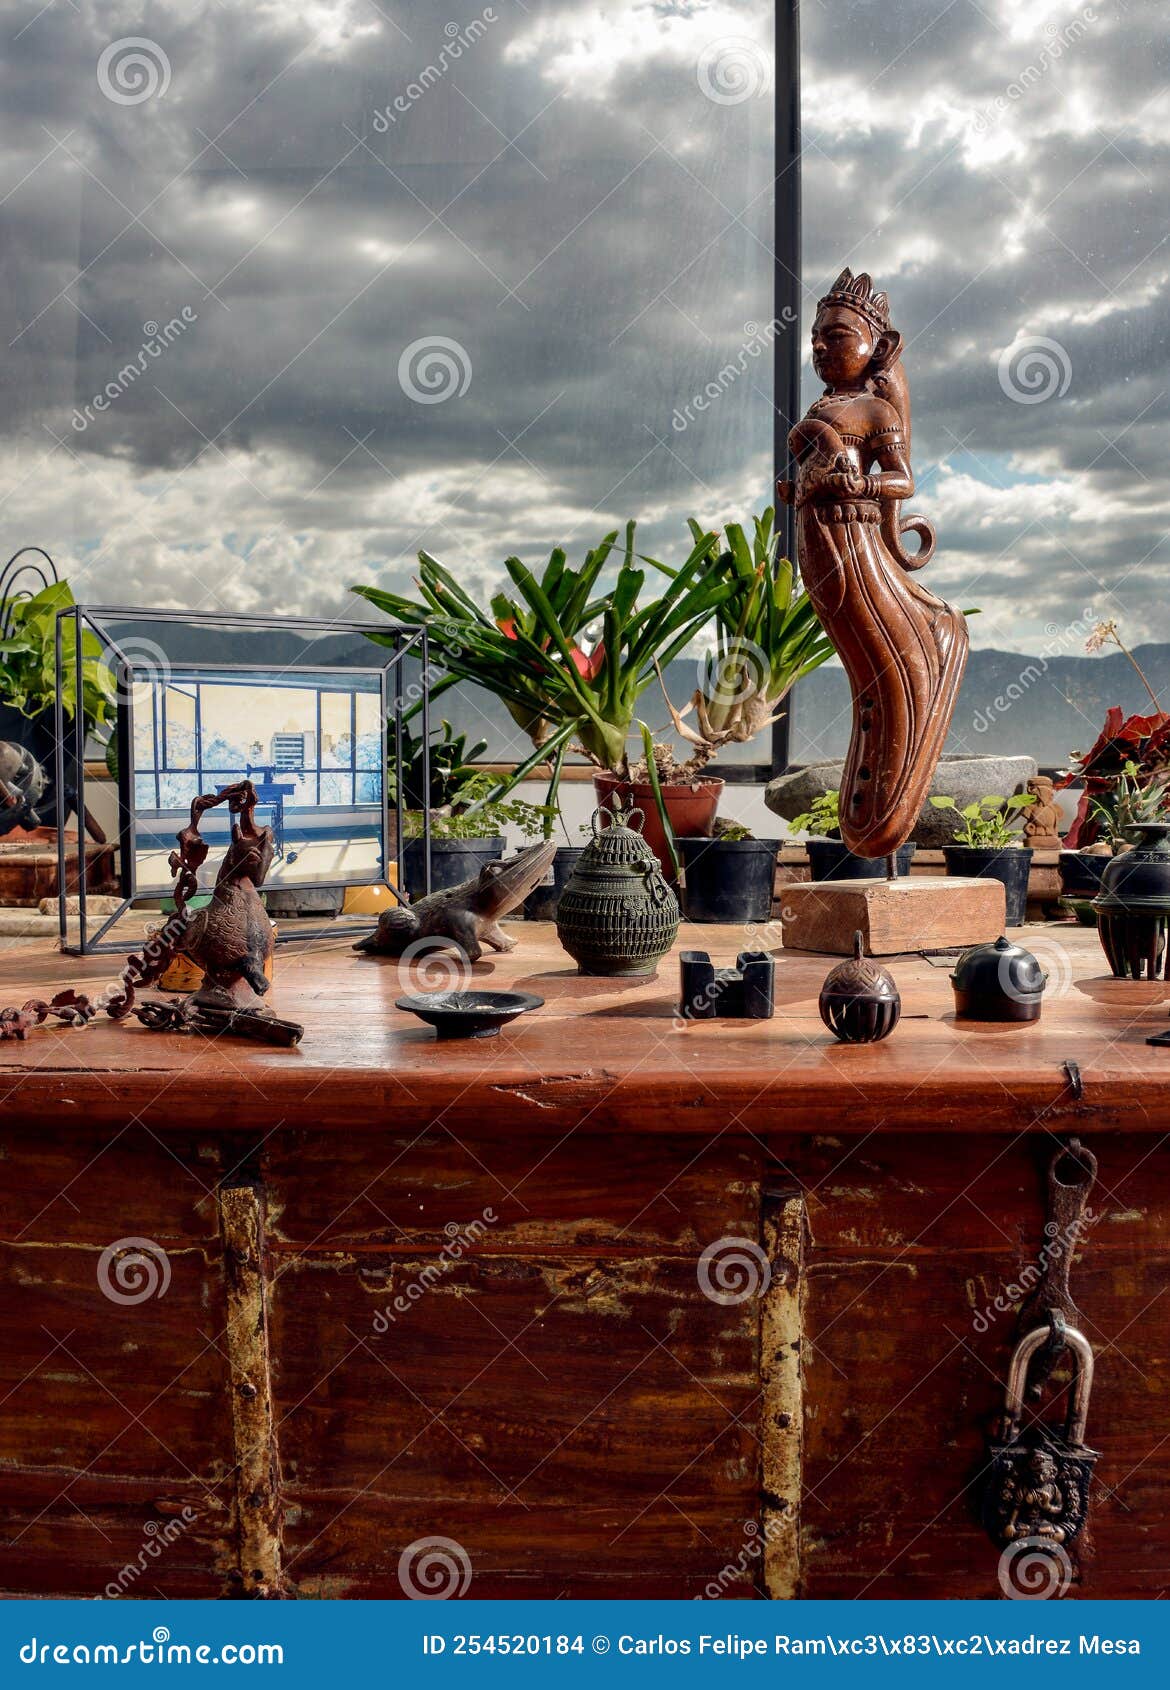 still life with a yoga and statue